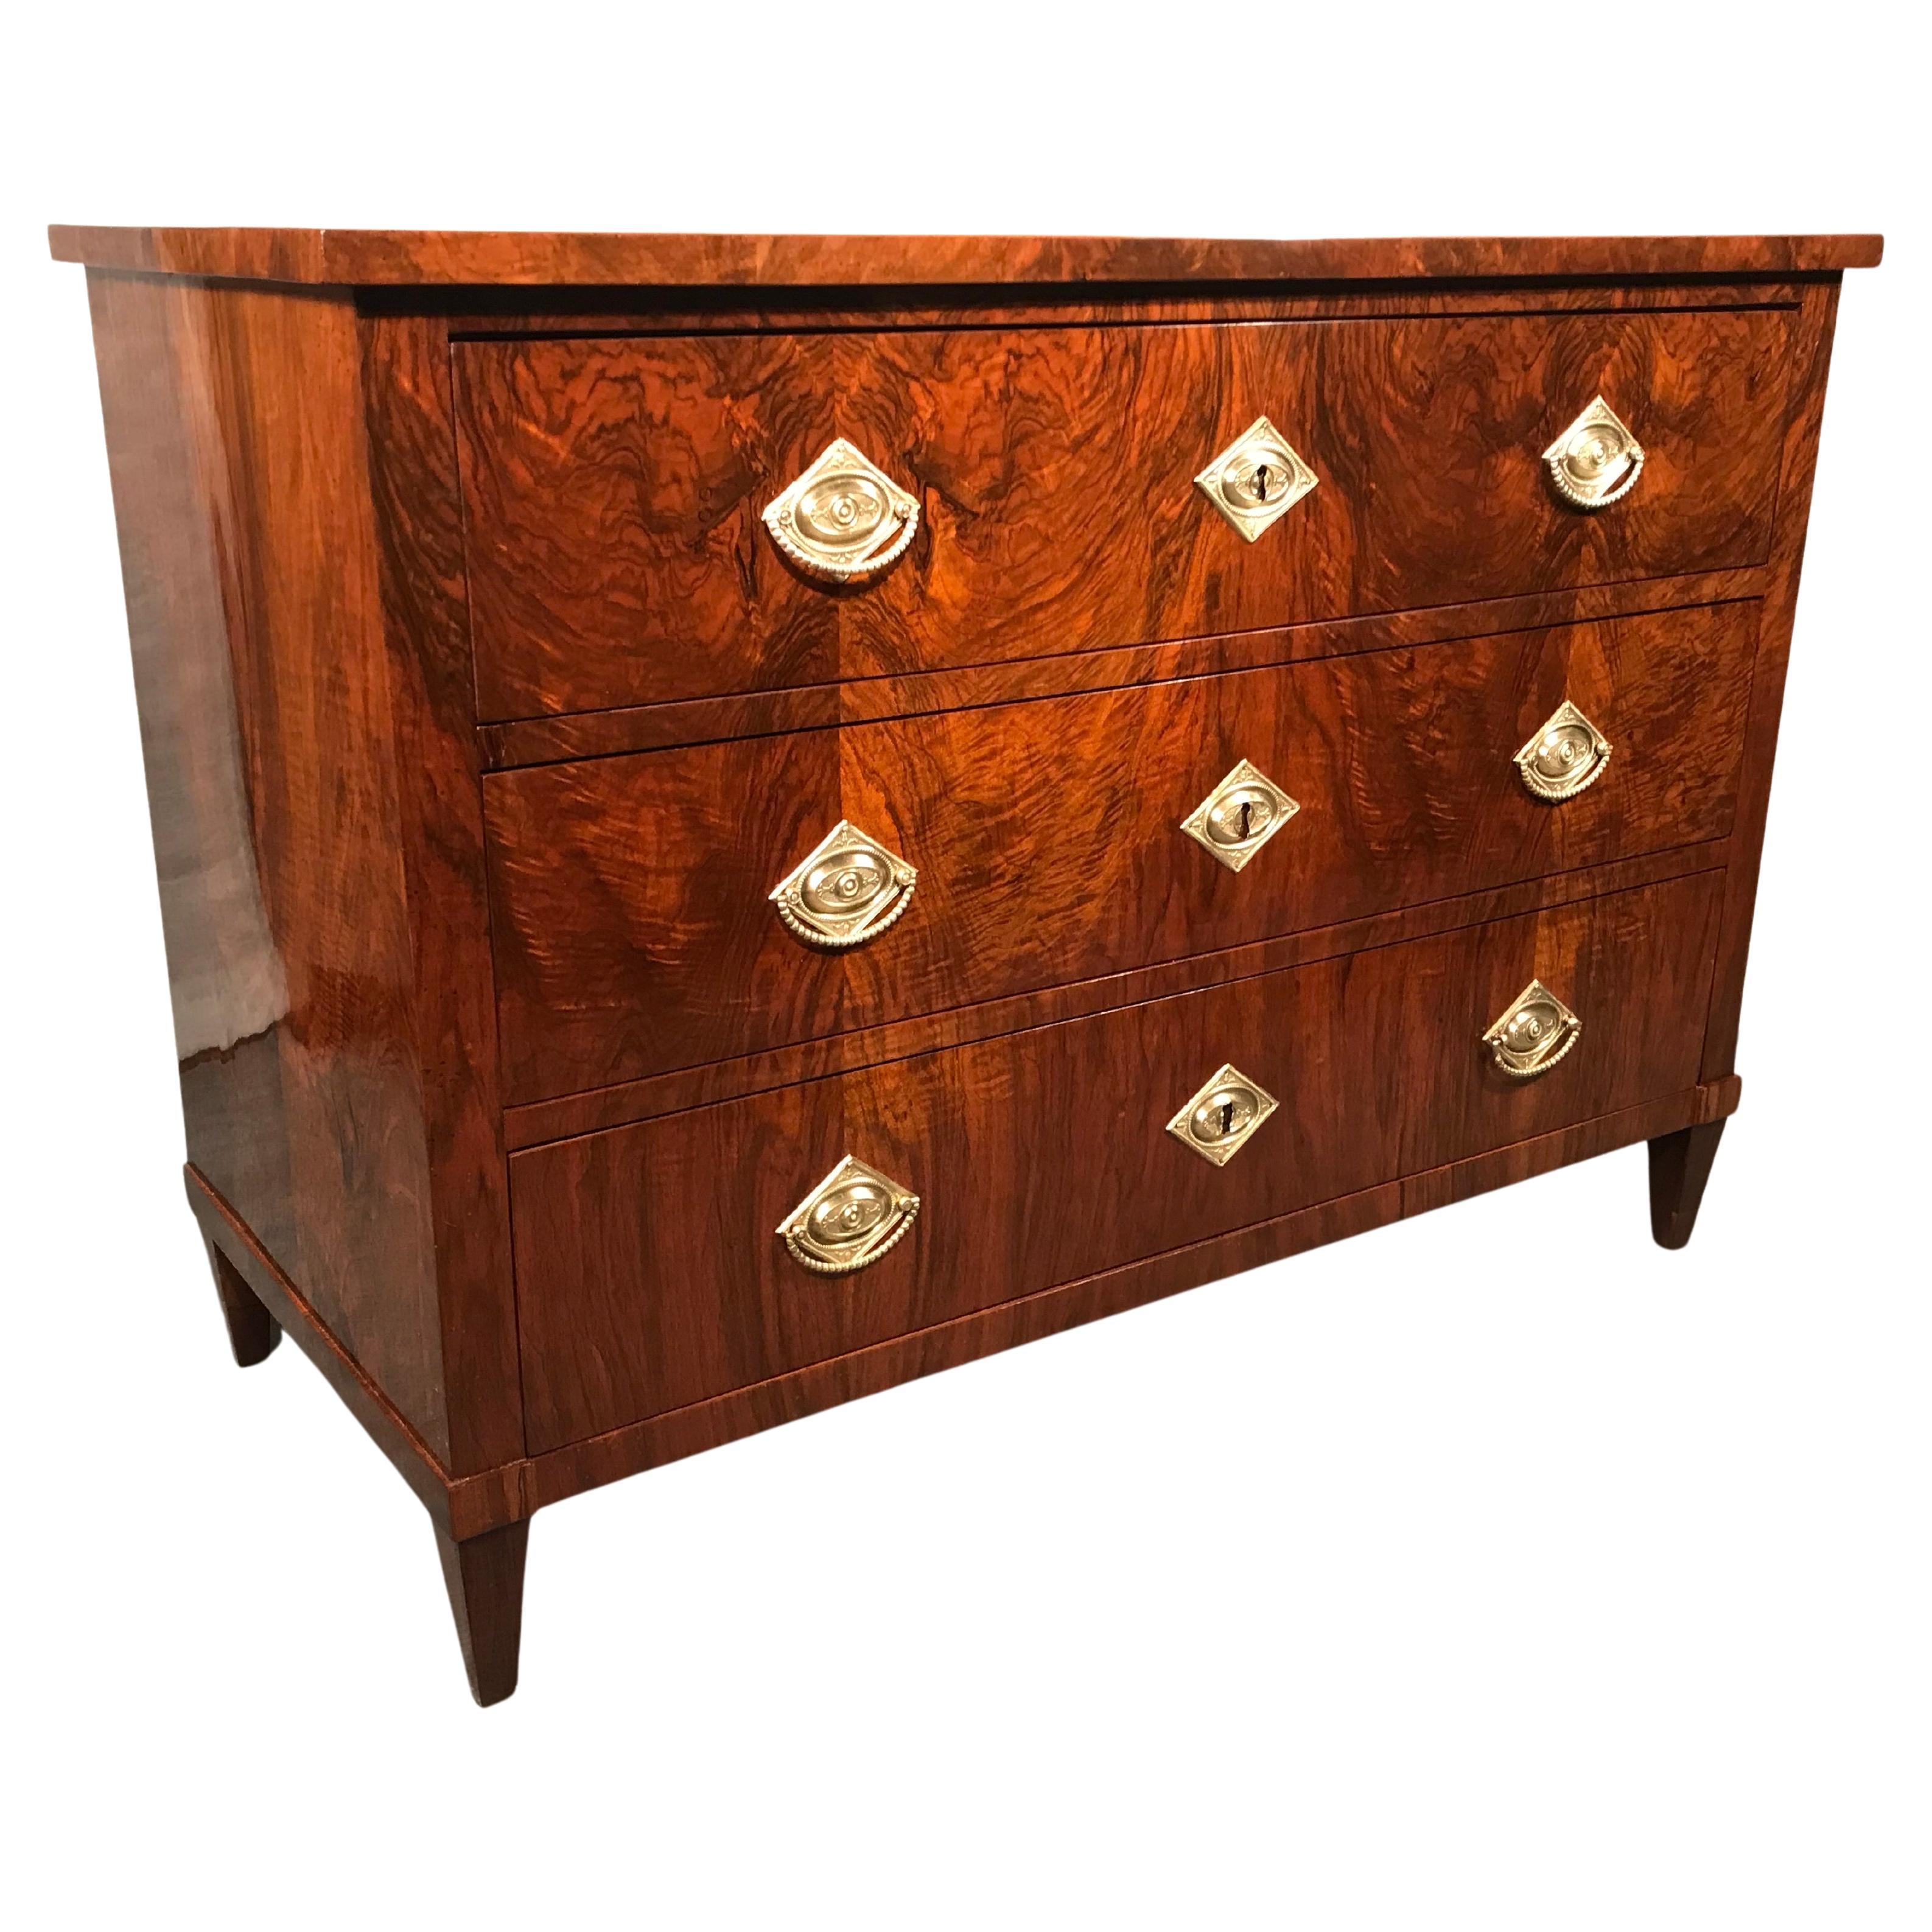 This original 1820's Biedermeier Chest of drawers comes from Southern Germany. The three drawer dresser stands out for its sleek design and the beautiful walnut veneer. It stands on four pointed feet.
The dresser comes refinished and French